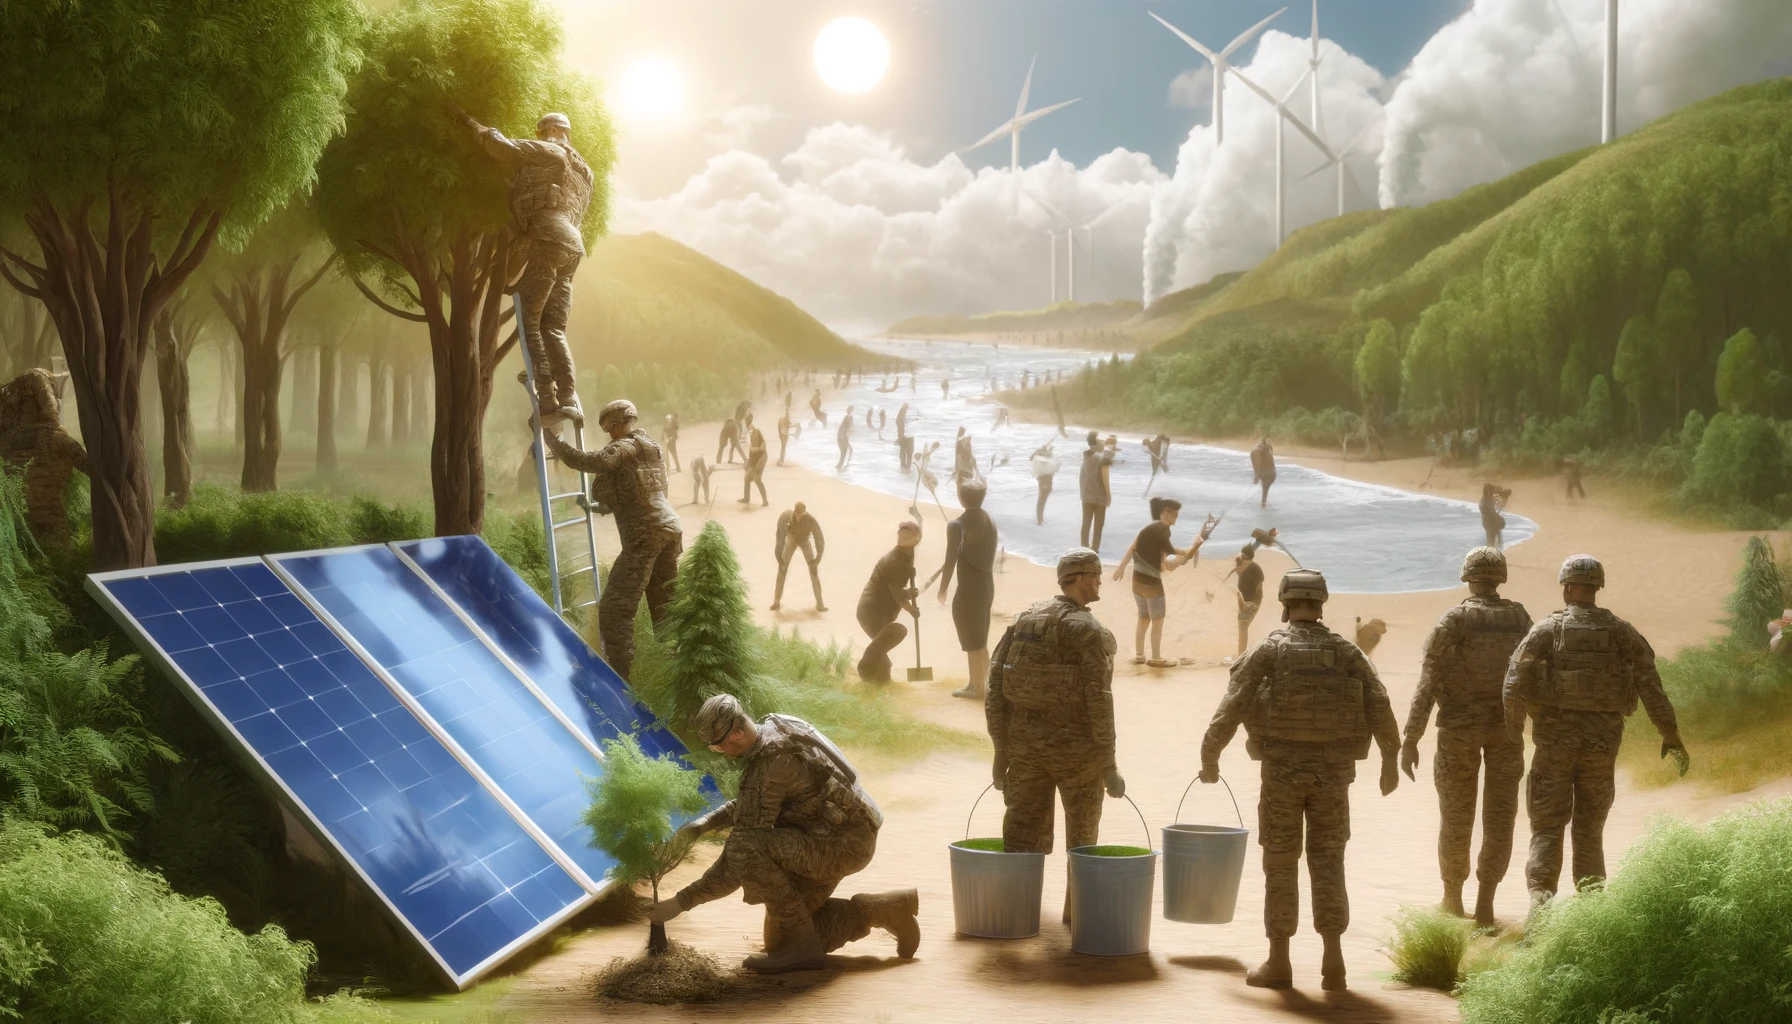 Frank DALL·E 2024-06-06 21.12.09 - A realistic image of modern soldiers and climate activists working together. Soldiers are planting trees, installing solar panels, and cleaning up a b